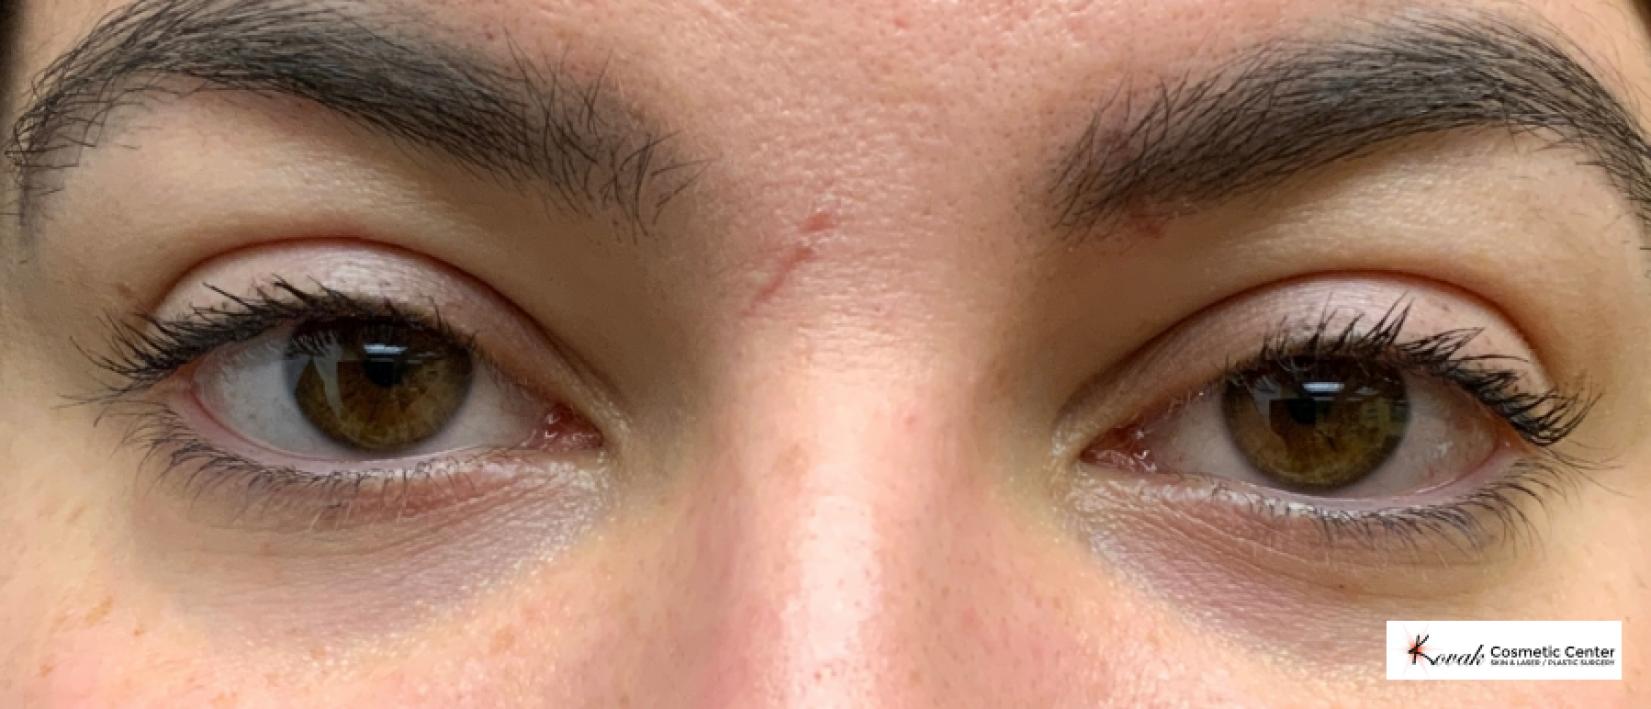 Dark Circle Treatment using Restylane Silk on a 23 year old Female - Before 1